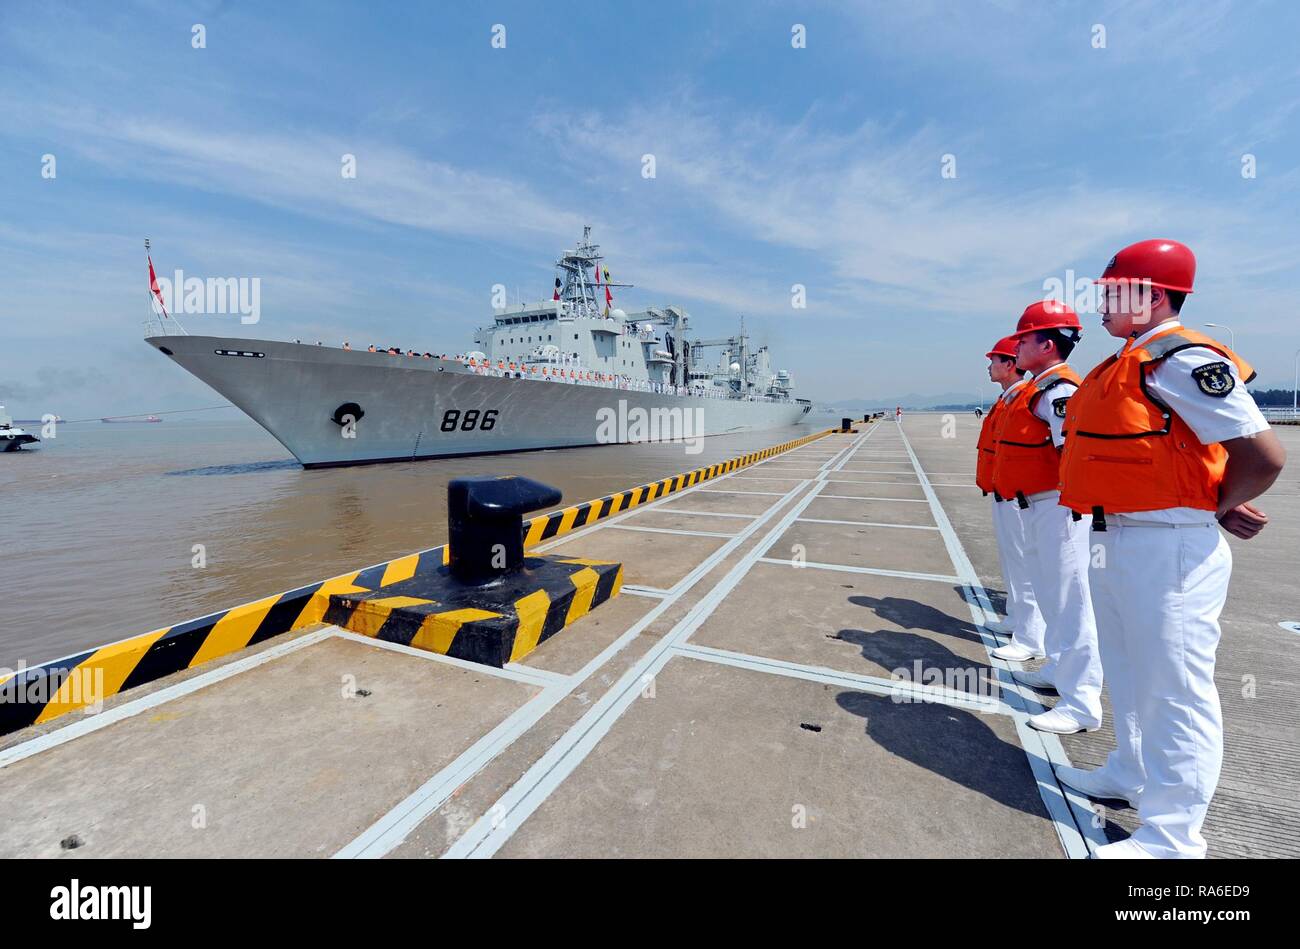 Beijing, China. 2nd Jan 2019. The 12th Chinese naval escort flotilla prepare to set sail at a port in Zhoushan, east China's Zhejiang Province, July 3, 2012. The 12th Chinese naval escort flotilla left Zhoushan for the escort mission in the Gulf of Aden and Somali waters to protect commercial ships from pirate attacks. China's naval fleets have escorted 3,400 foreign ships over the past 10 years, around 51.5 percent of the total escorted, according to a Ministry of National Defense statement.     Wu Qian, a spokesperson for the ministry, told a press conference that China sent Stock Photo